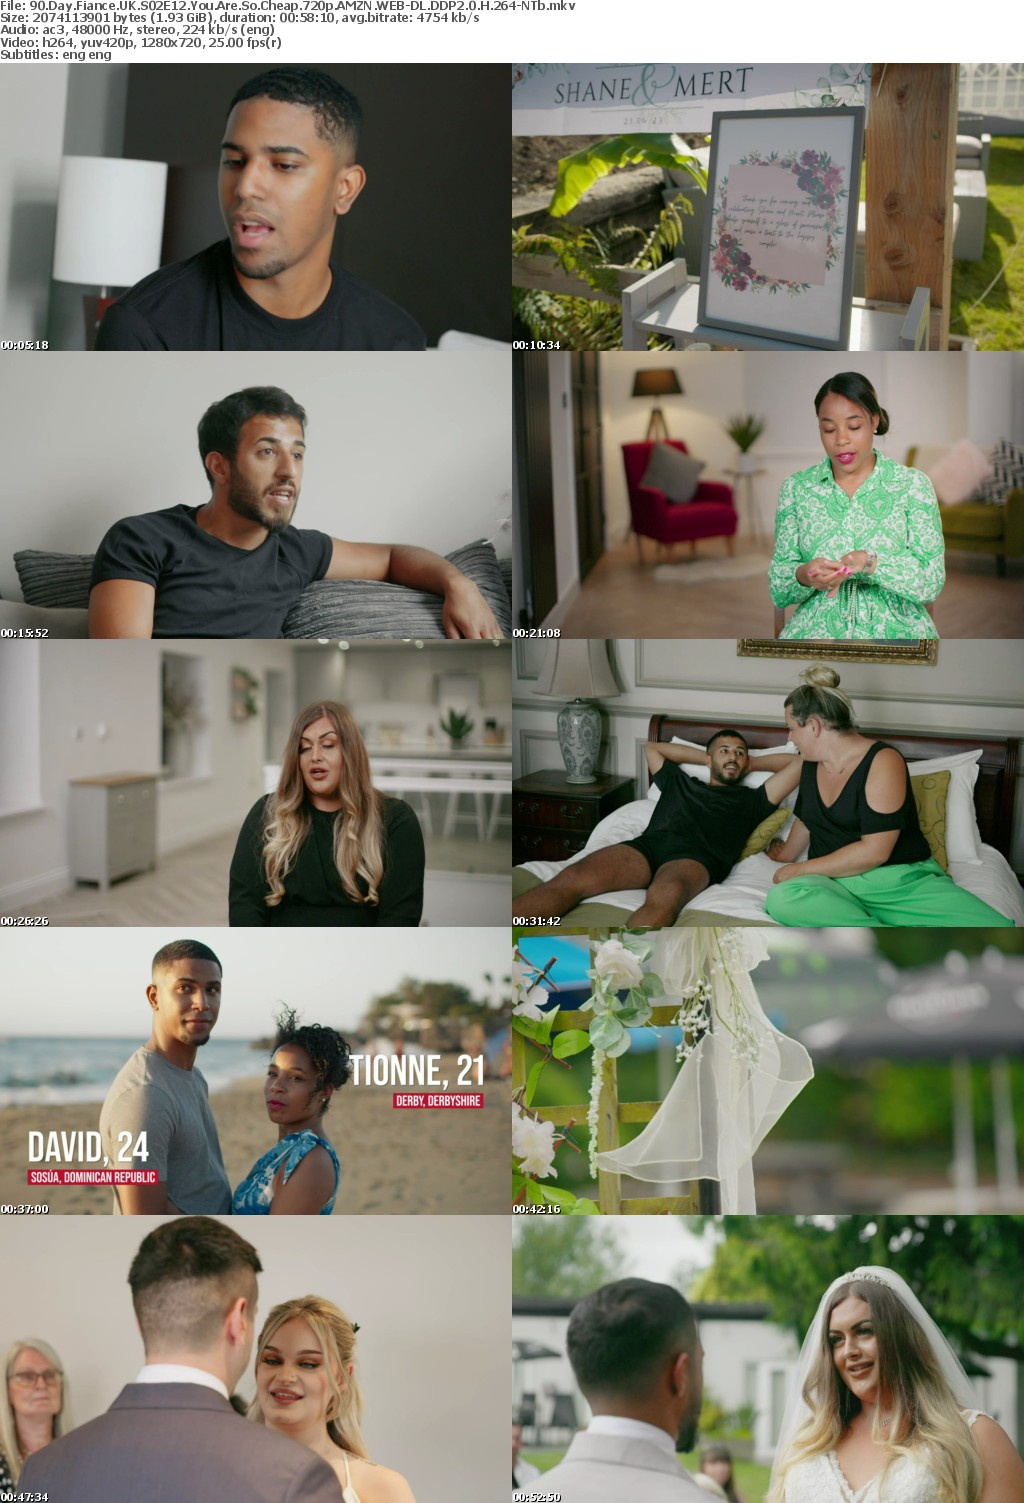 90 Day Fiance UK S02E12 You Are So Cheap 720p AMZN WEB-DL DDP2 0 H 264-NTb